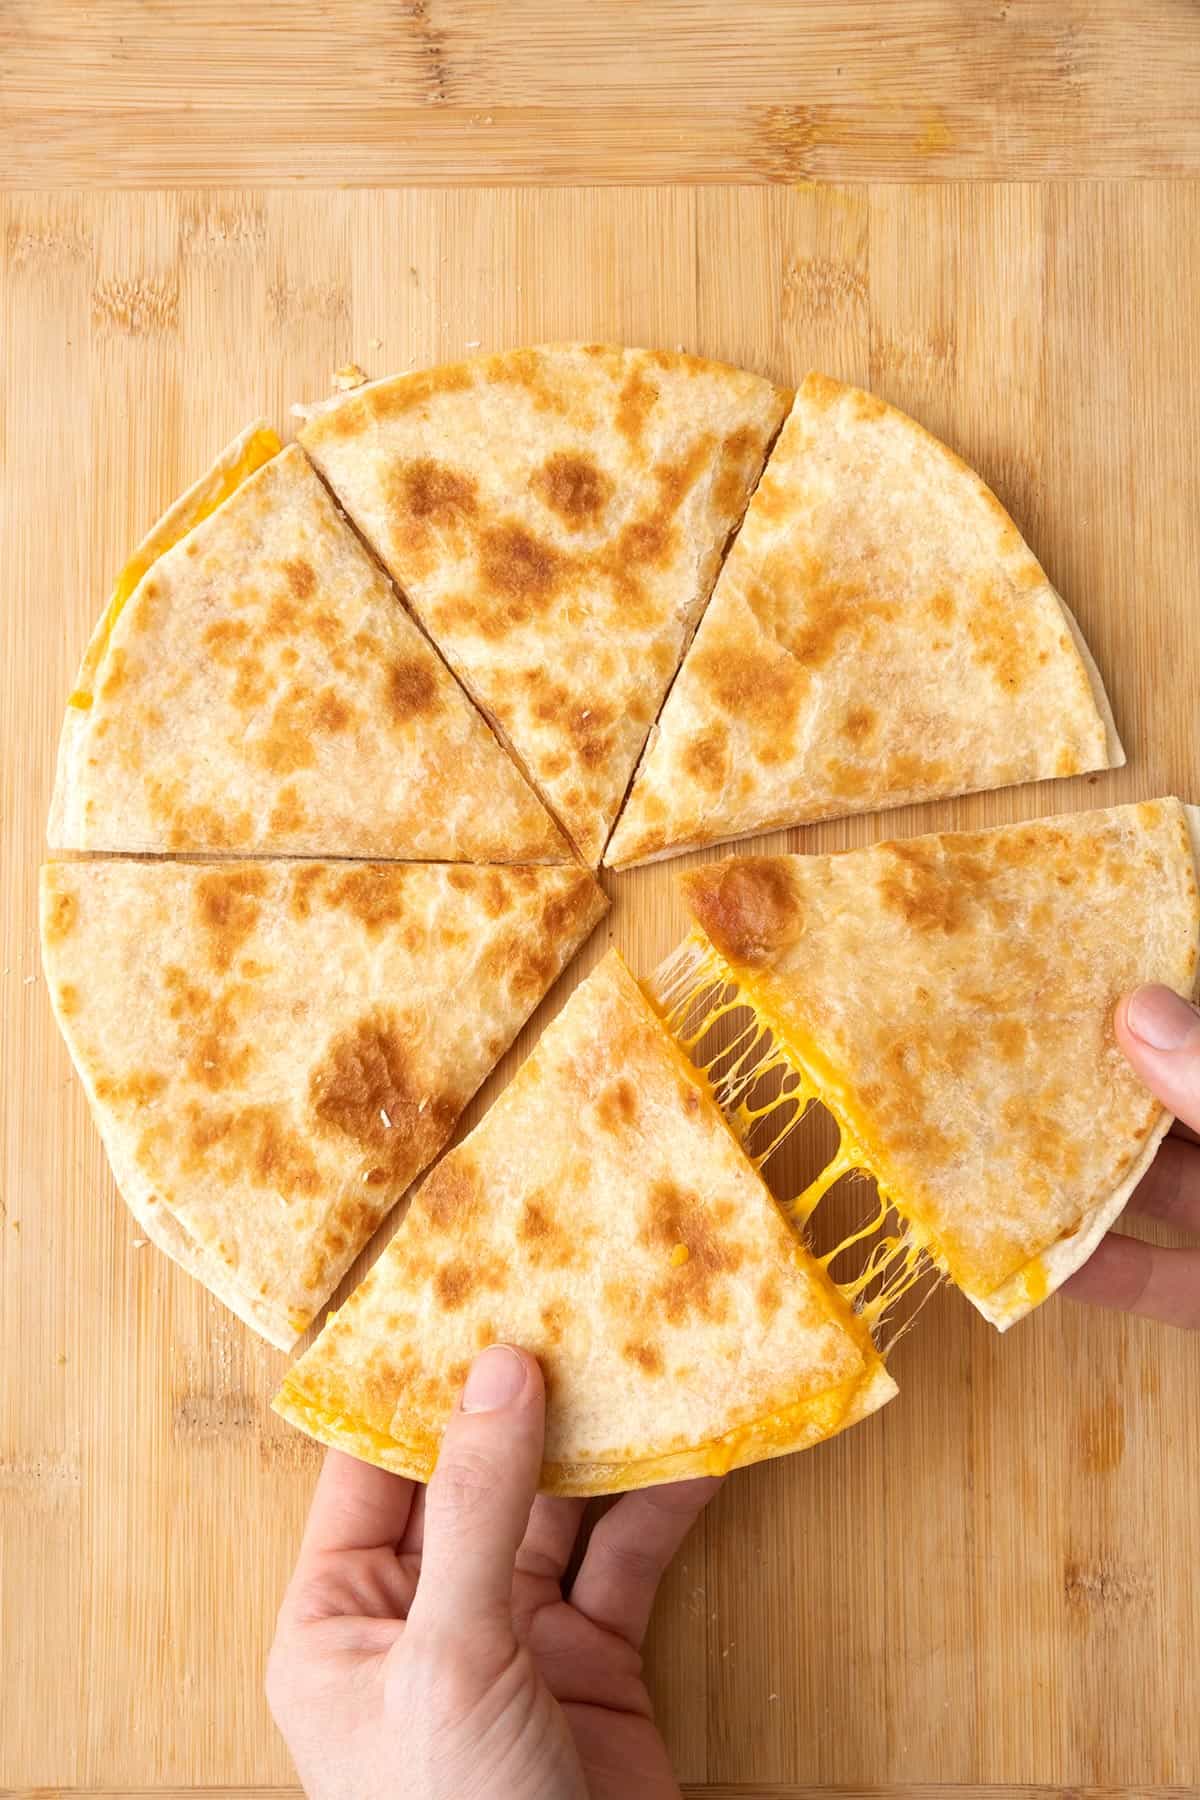 Cheese quesadilla on a cutting board cut in 6 pieces with hands pulling apart two slices to show a cheese pull.